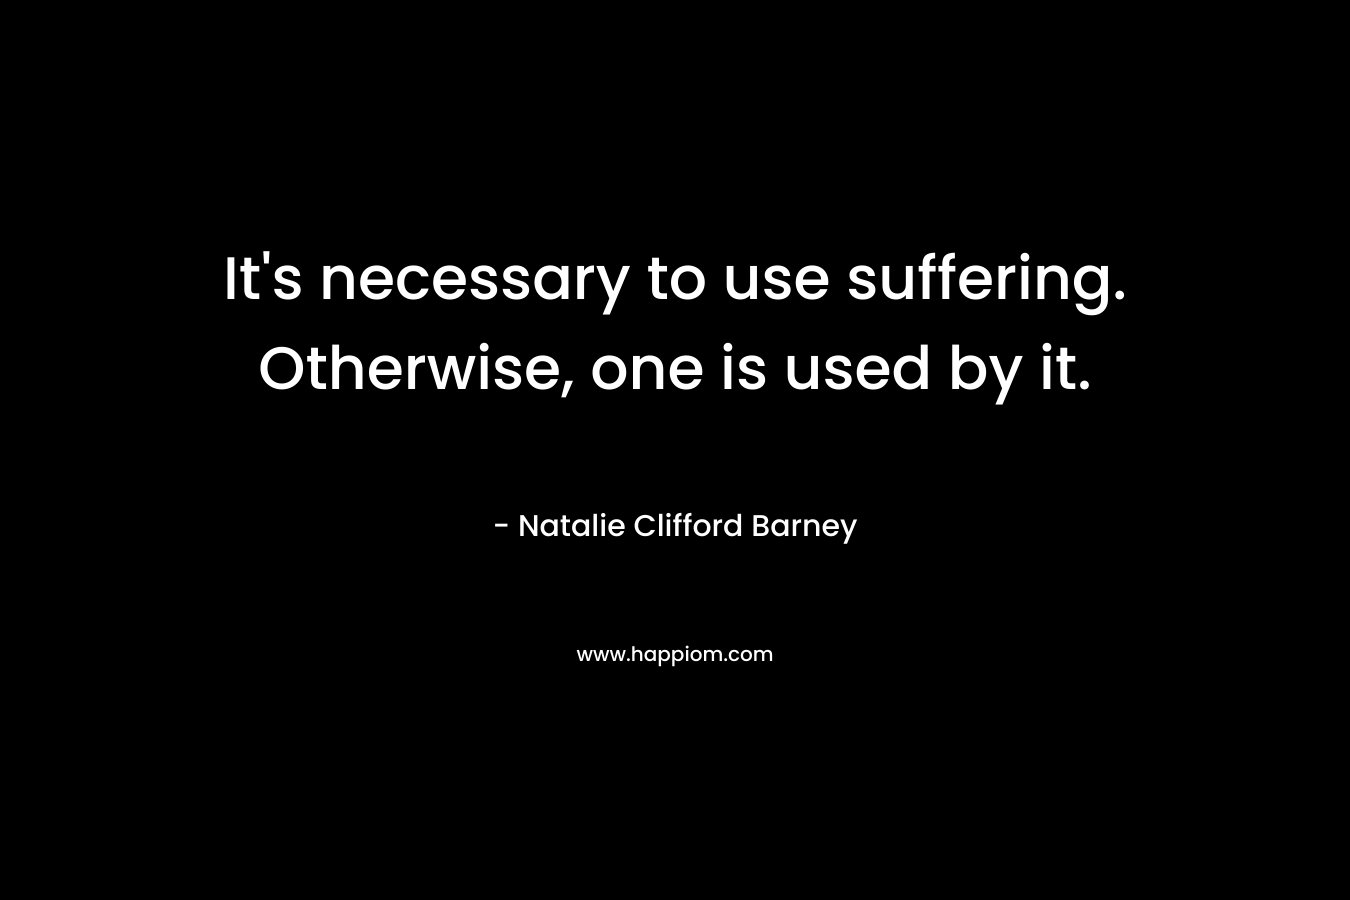 It's necessary to use suffering. Otherwise, one is used by it.